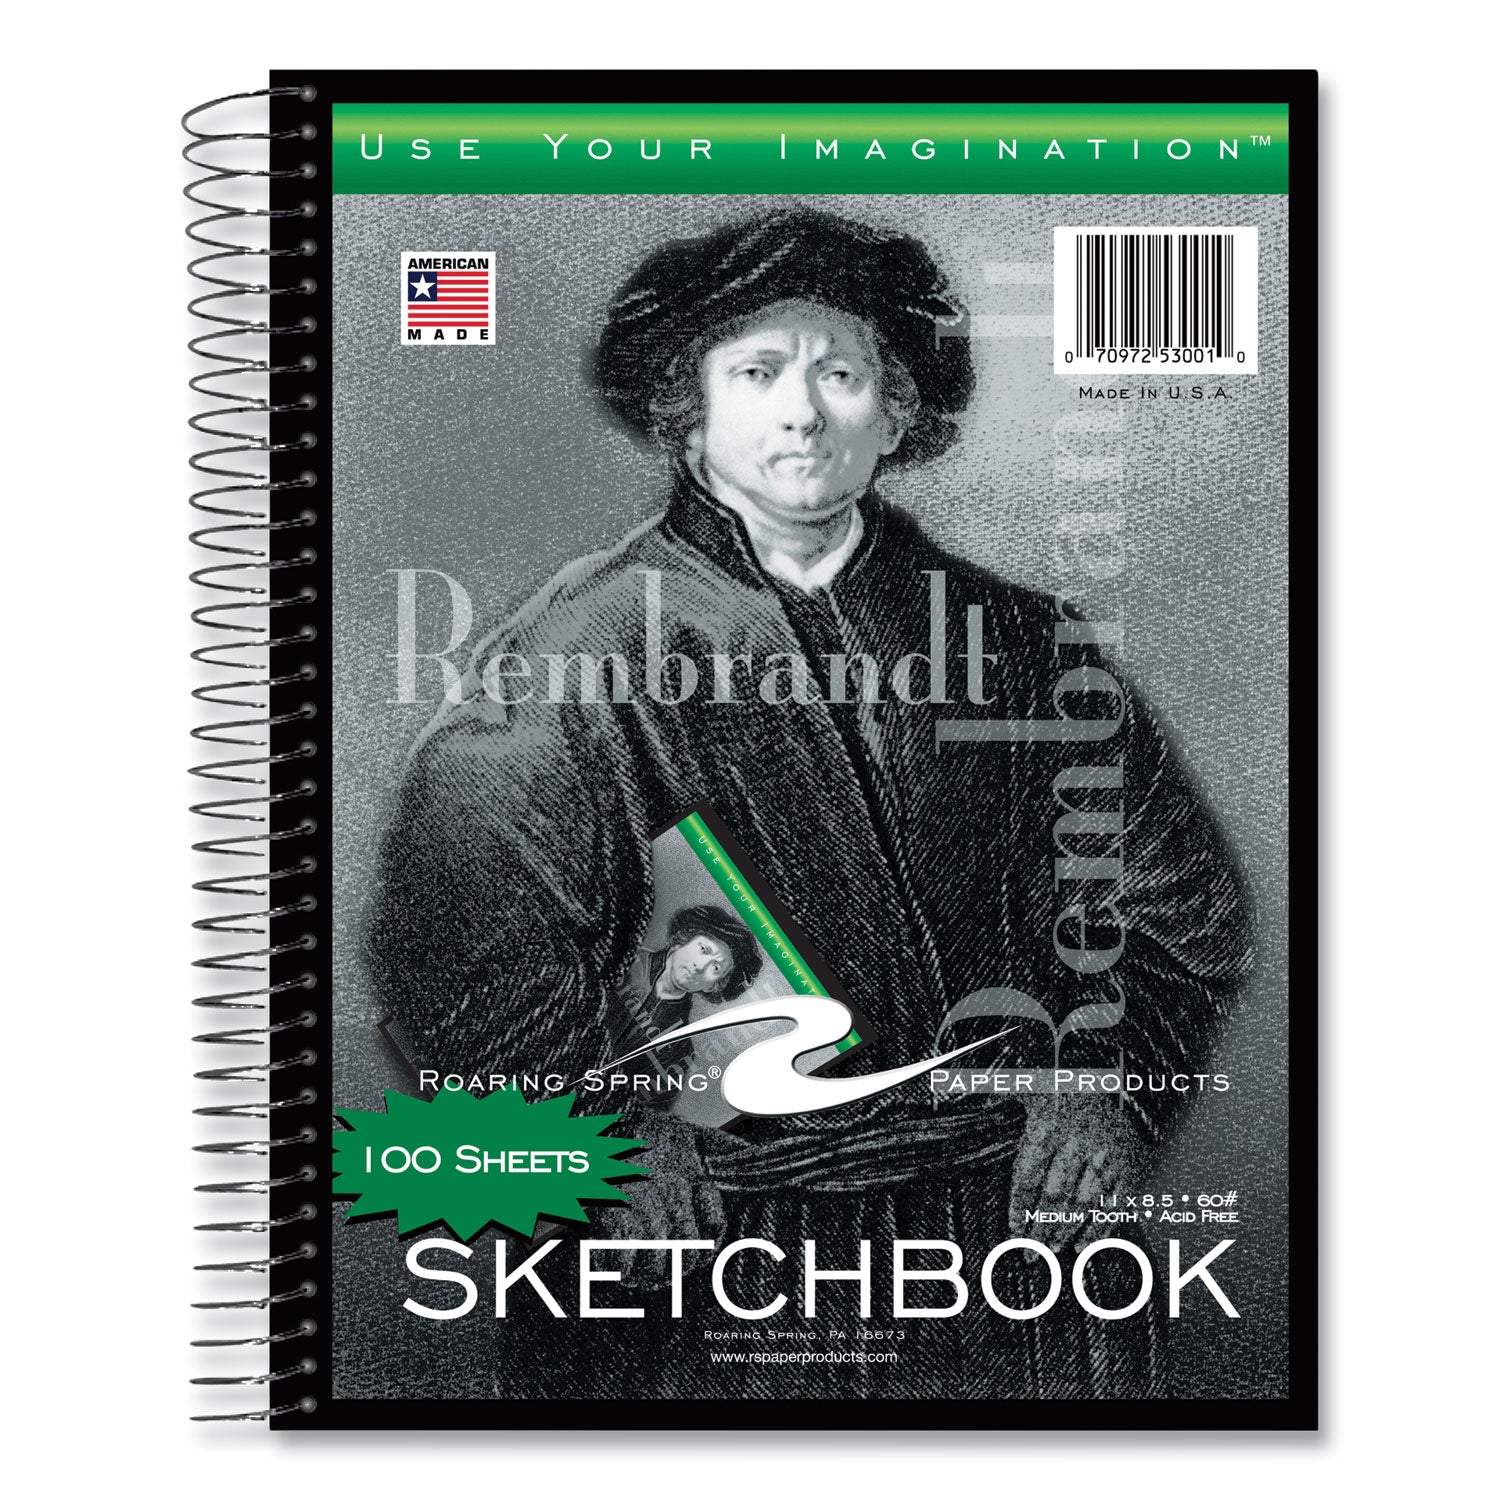 sketch-book-60-lb-drawing-paper-stock-rembrandt-photography-cover-100-11-x-85-sheets12-ct-ships-in-4-6-business-days_roa53101cs - 2